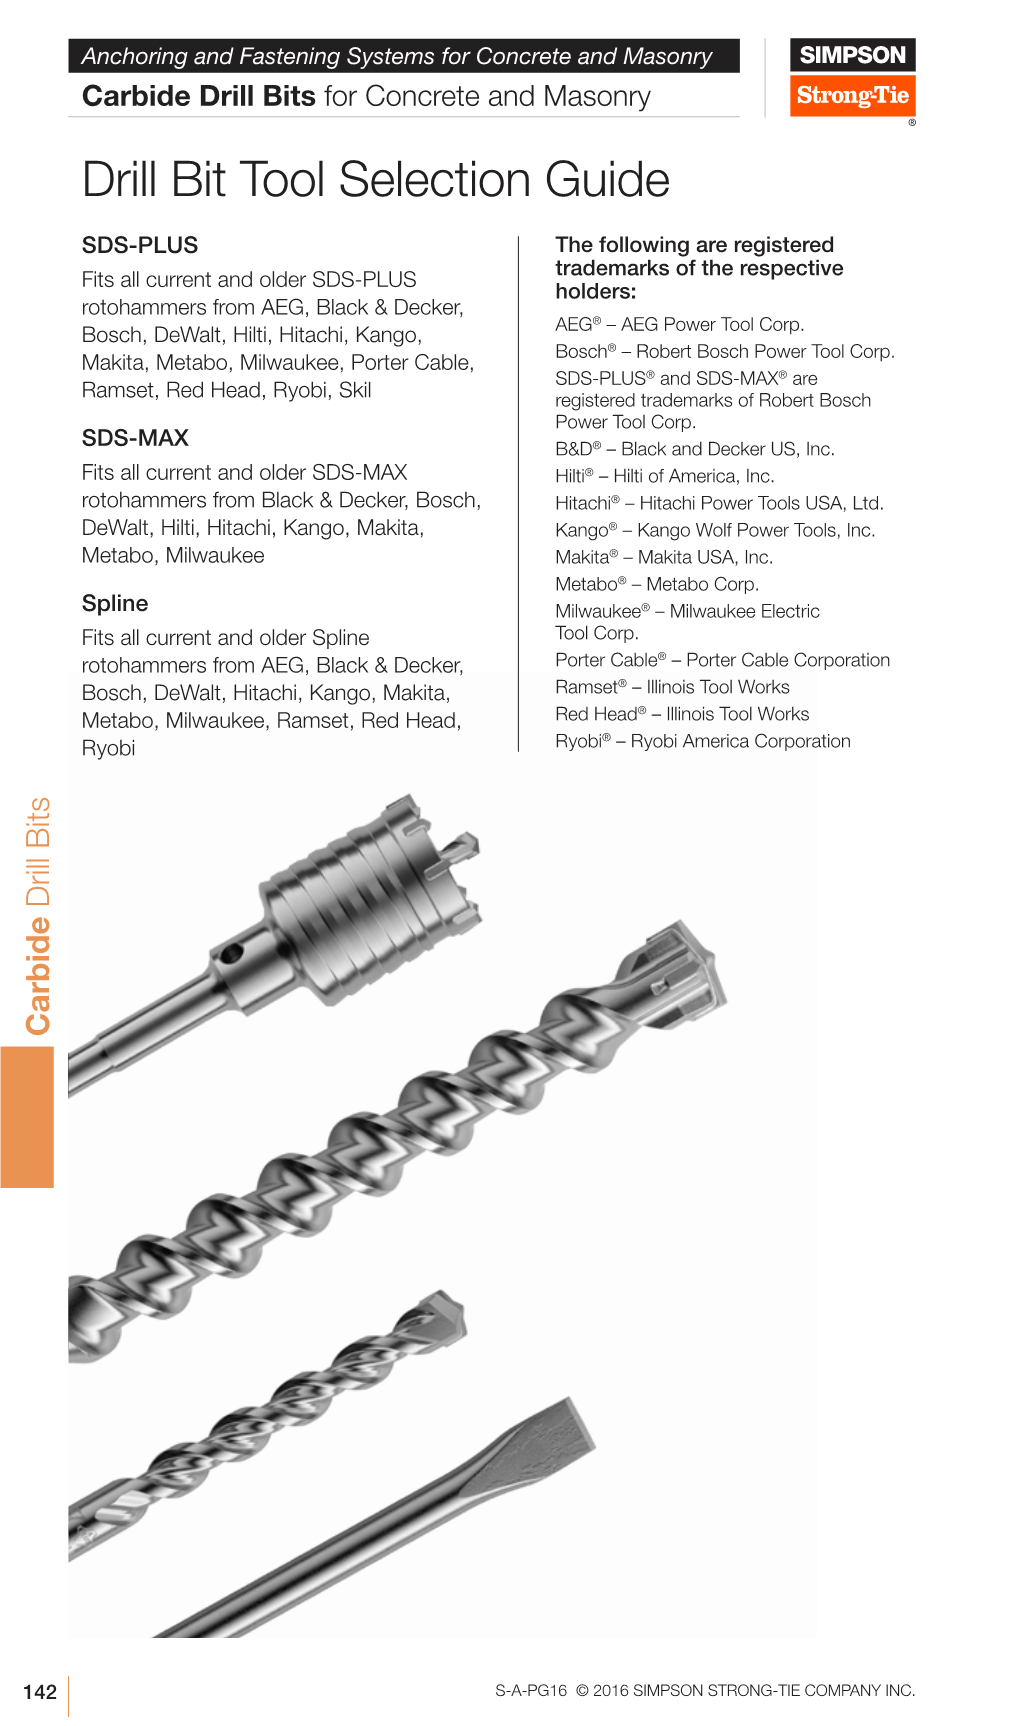 2017 Product Guide Anchoring and Fastening